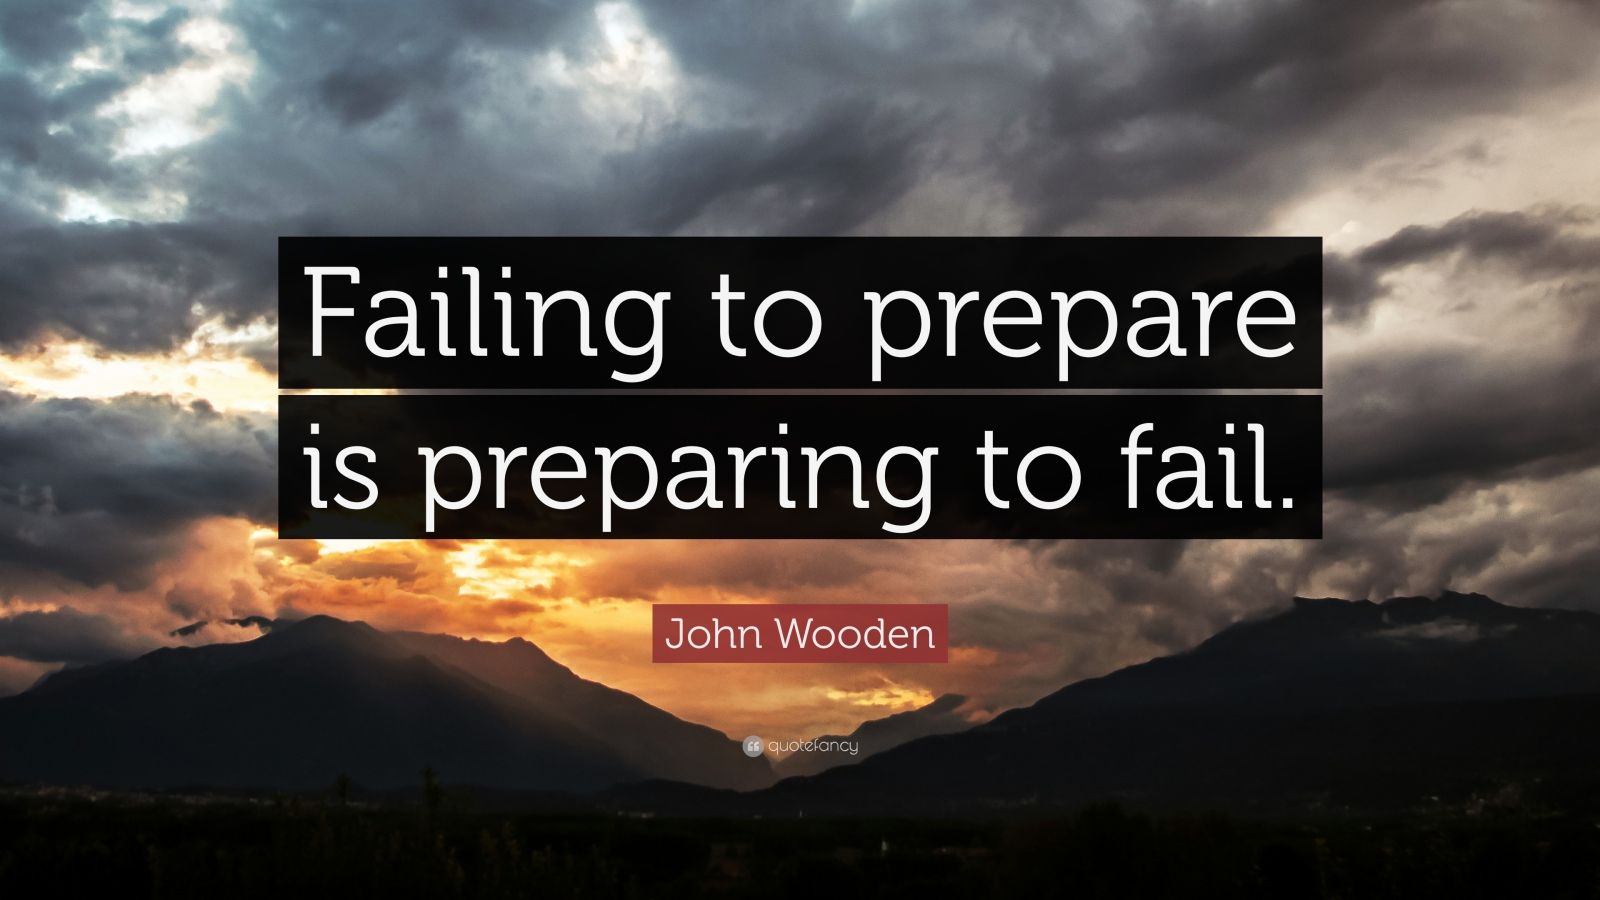 John Wooden Quote: “Failing to prepare is preparing to fail.” (22